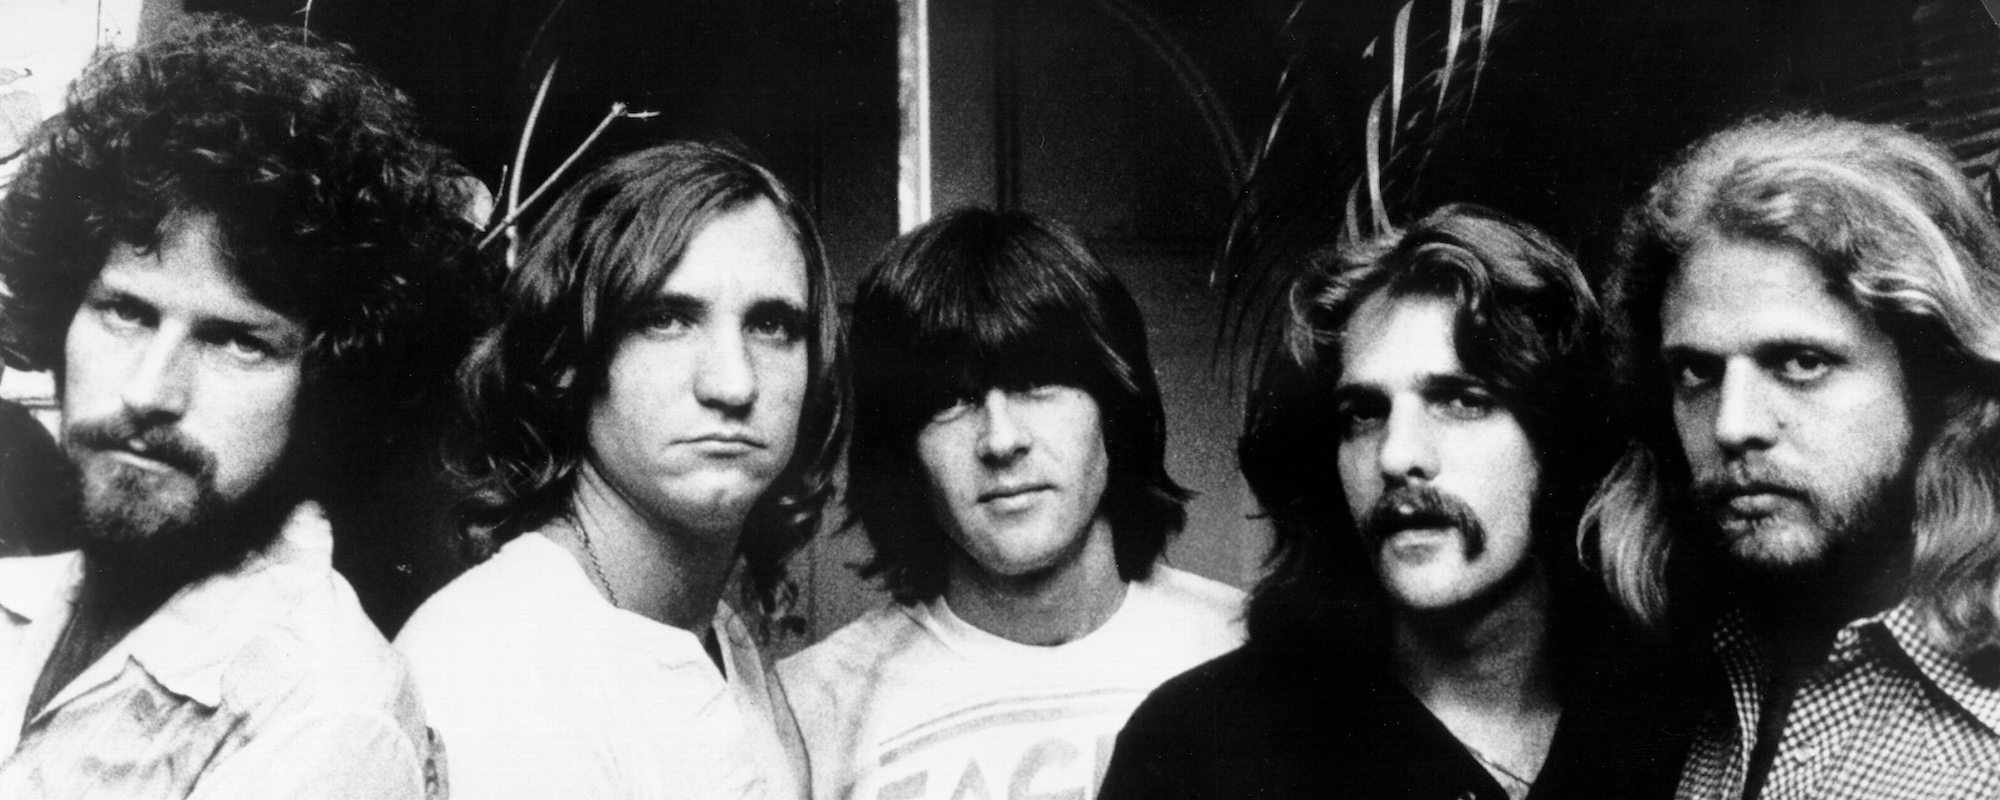 Cool Covers: Listen to These Interesting Renditions of the Eagles’ “Hotel California”